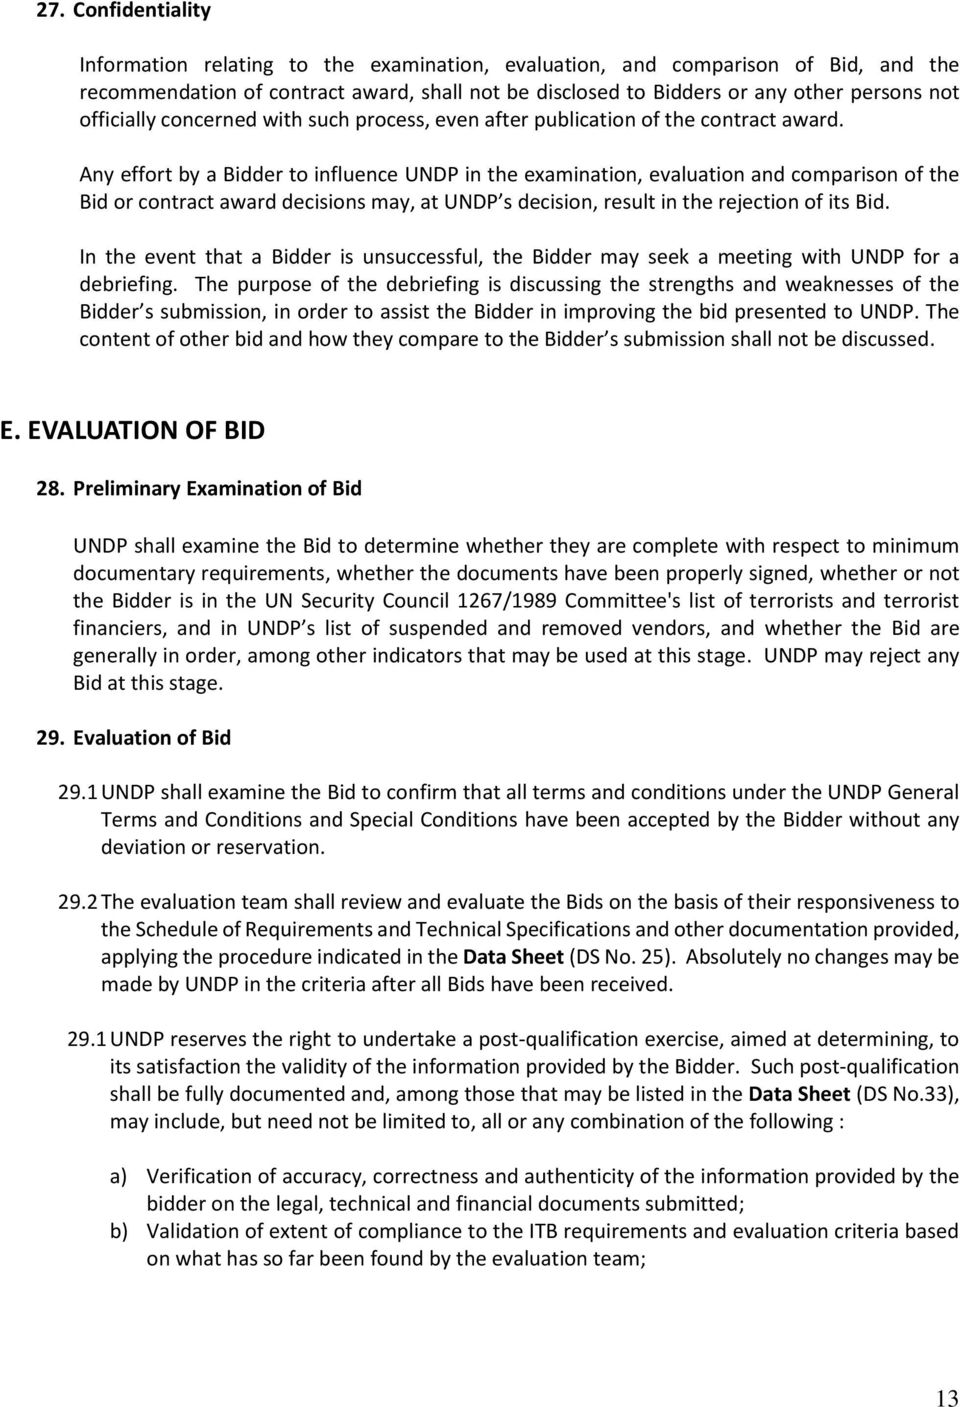 Any effort by a Bidder to influence UNDP in the examination, evaluation and comparison of the Bid or contract award decisions may, at UNDP s decision, result in the rejection of its Bid.